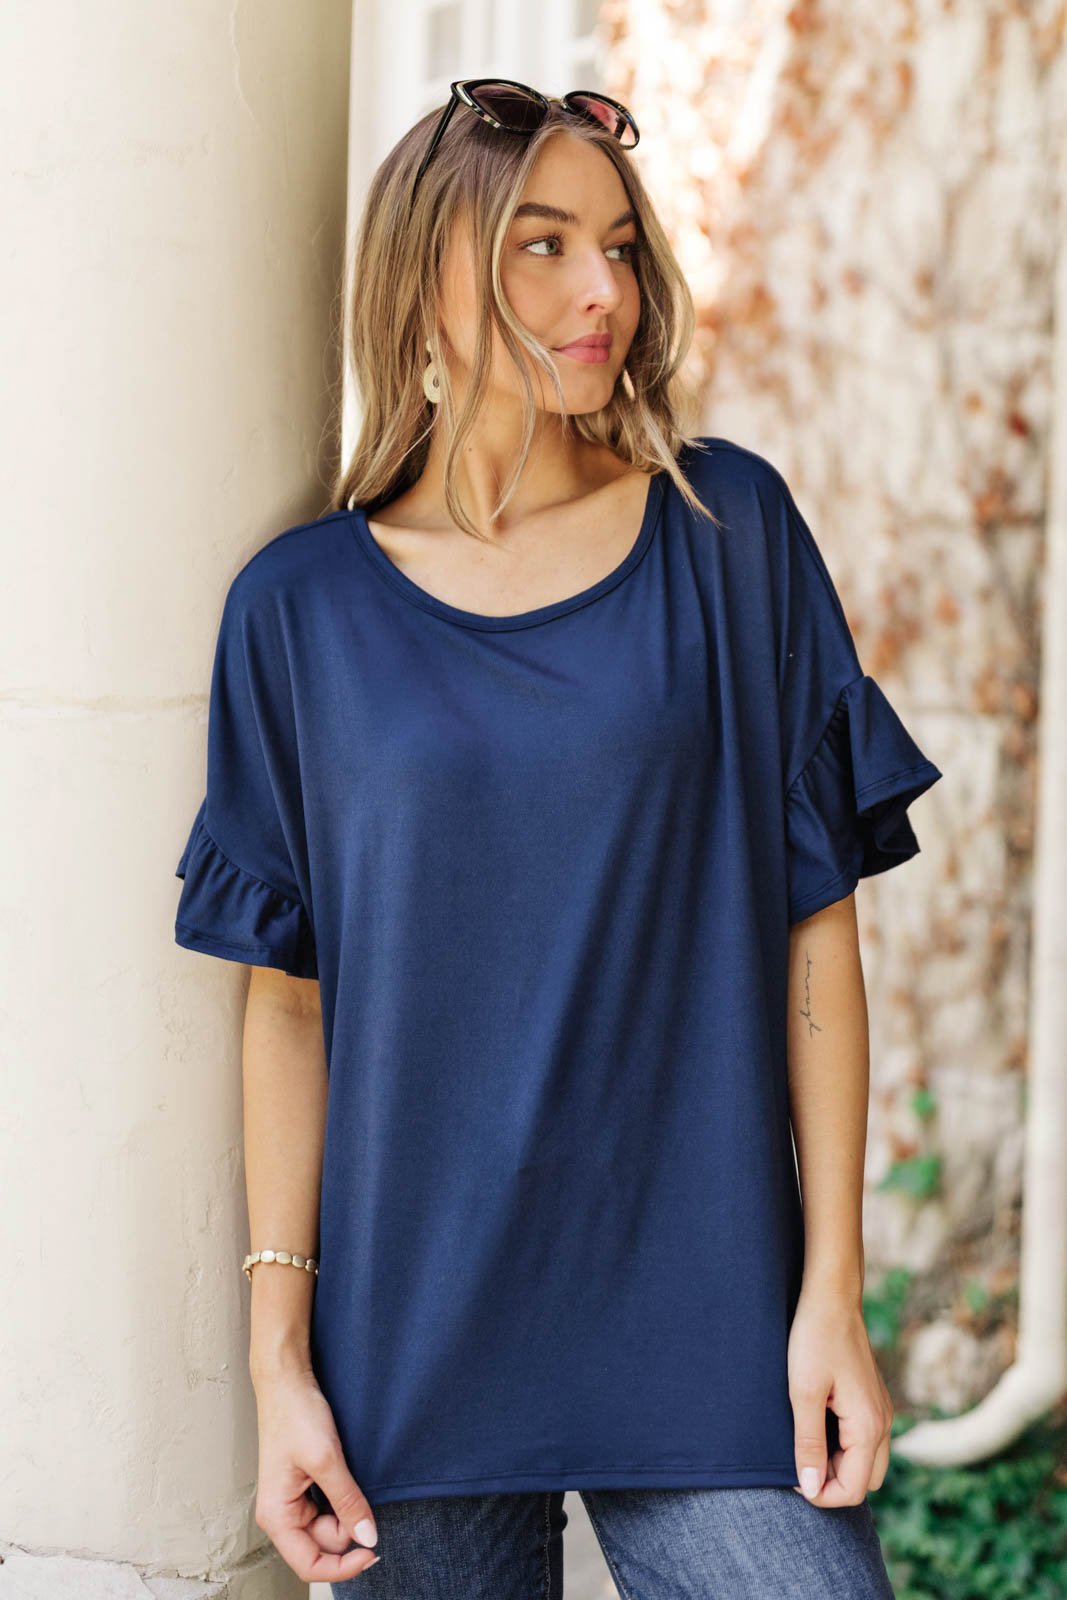 Twisted Luck Top in Navy